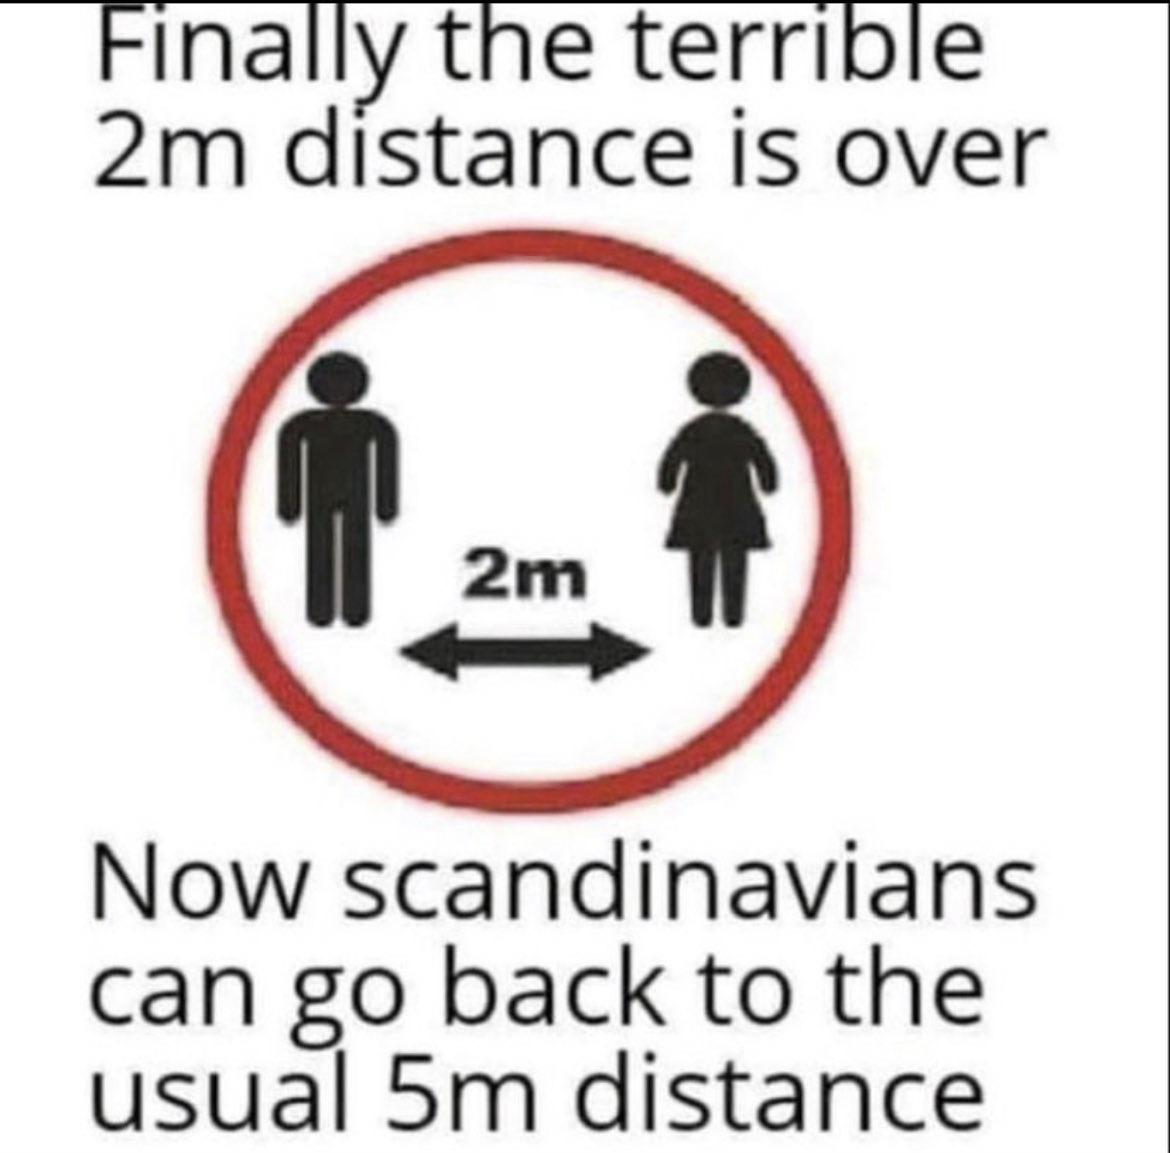 Finally the terrible 2m distance is over. Now Scandinavians can go back to the usual 5m distance.